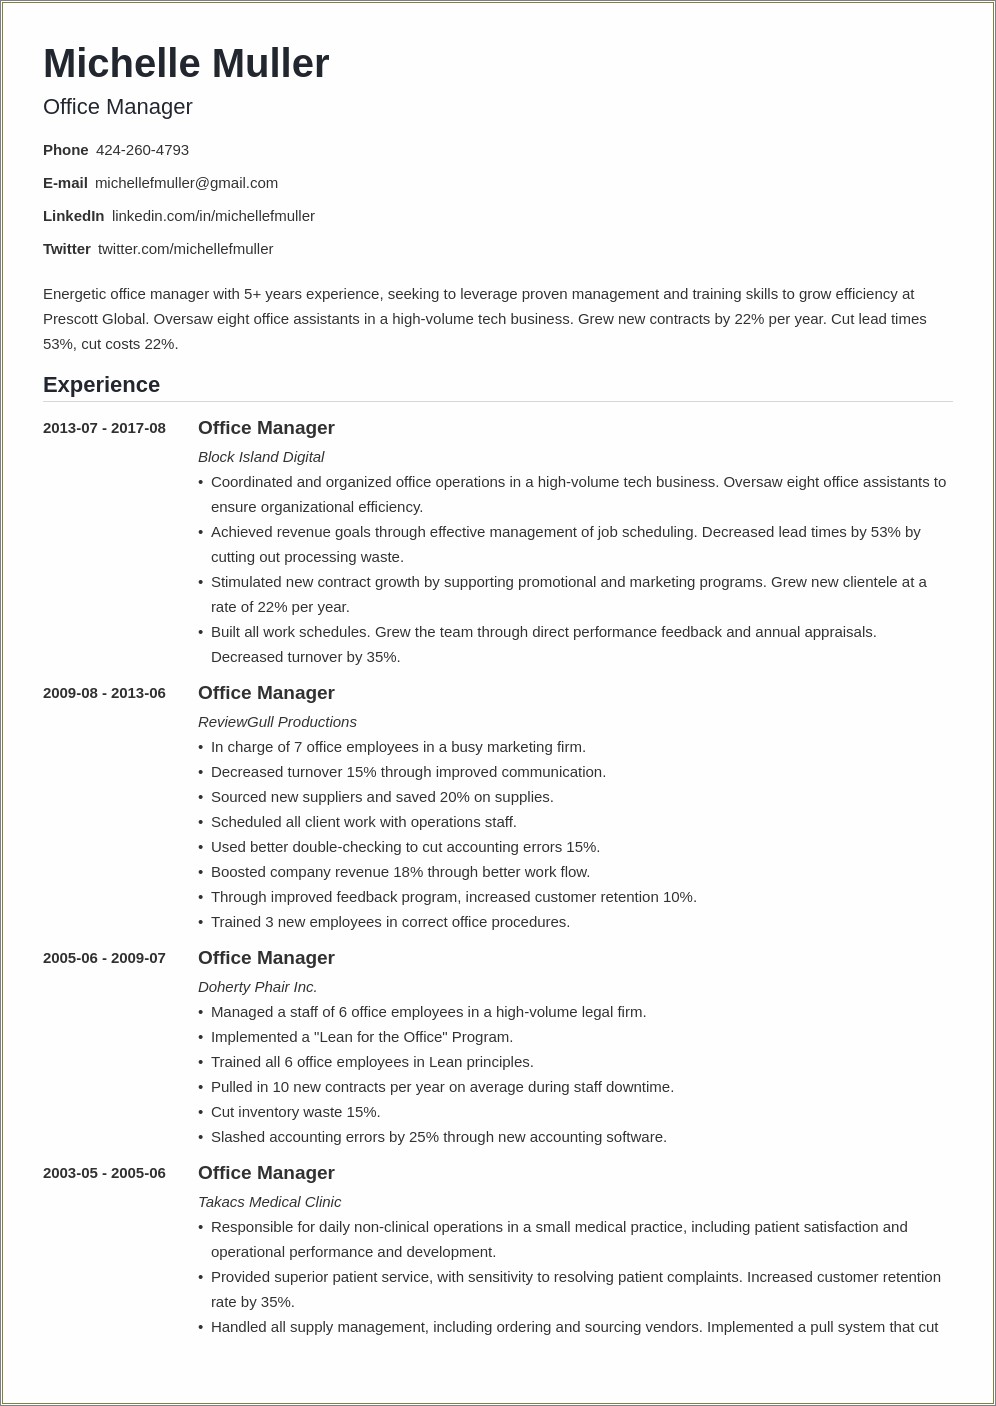 4 Years Experience 2 Page Resume